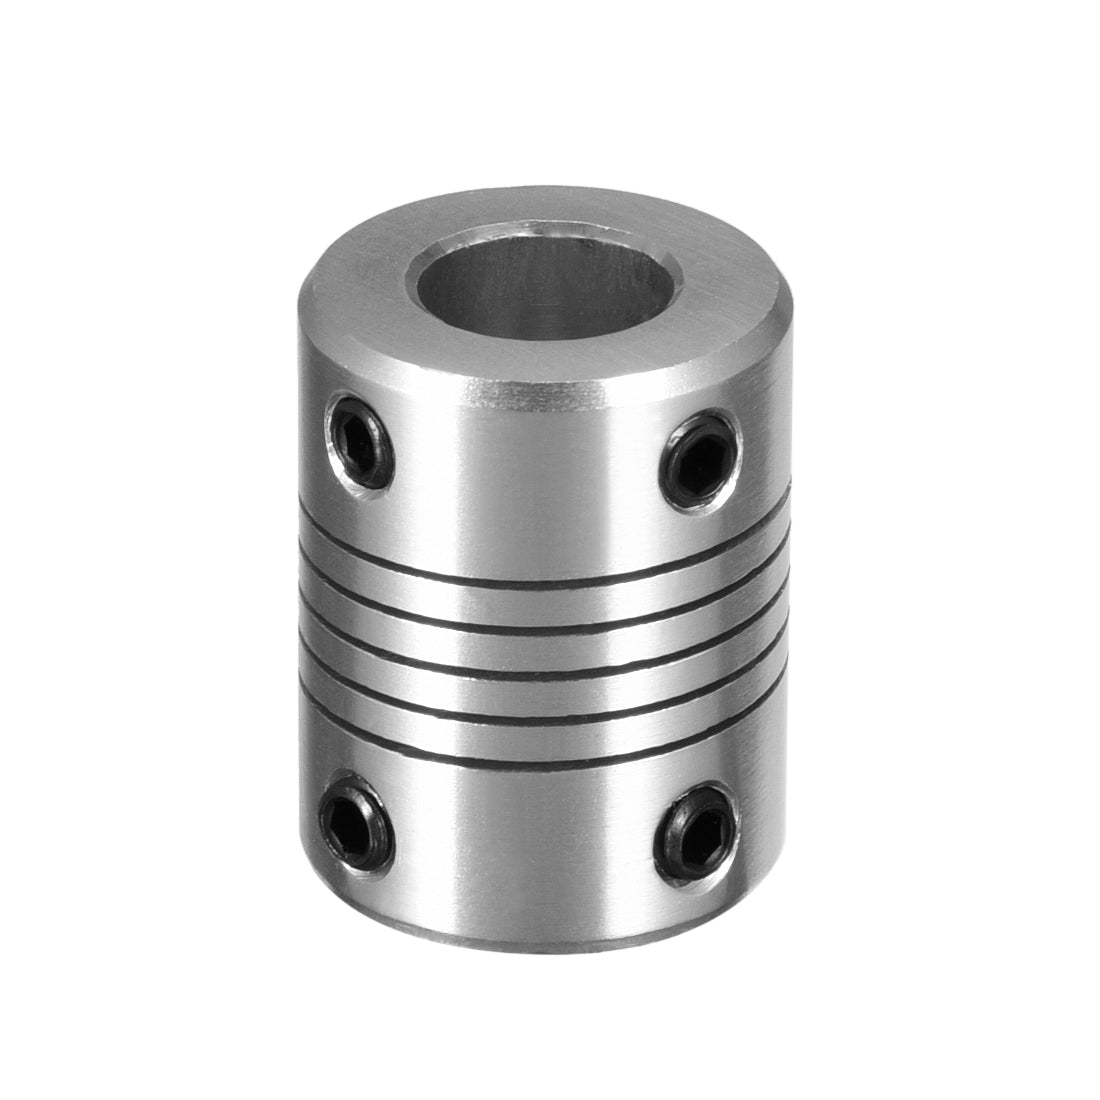 uxcell Uxcell 10mm to 10mm Stainless Steel Shaft Coupling Flexible Coupler Motor Connector Joint L25xD20 Silver